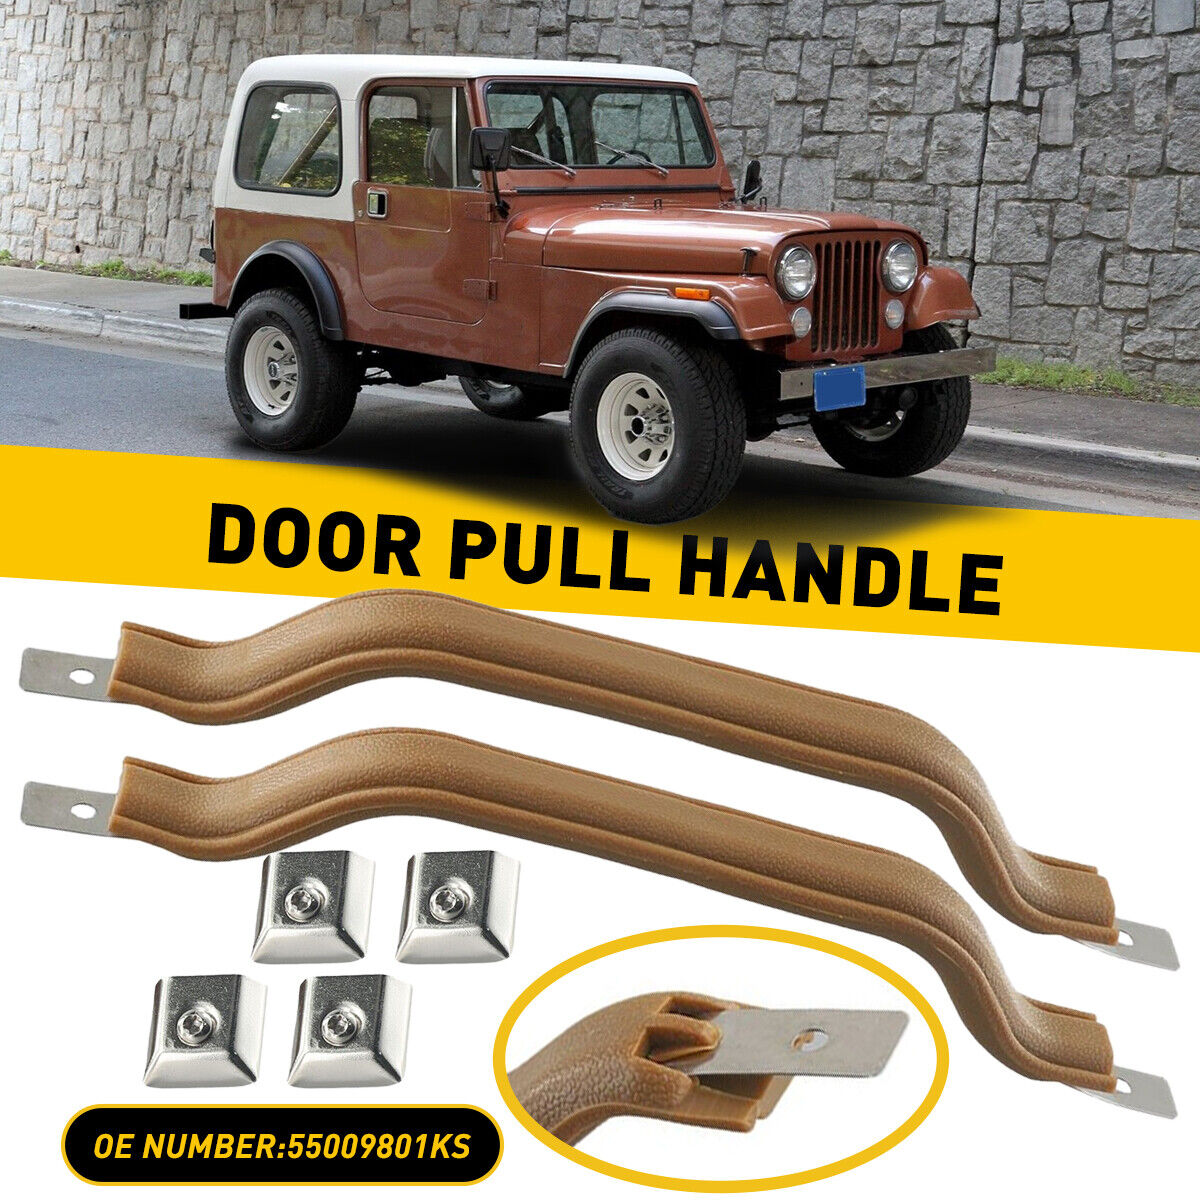 2Pcs Tan Interior Door Pull Handle Front LH or RH For 1987-1995 Jeep Wrangler Y